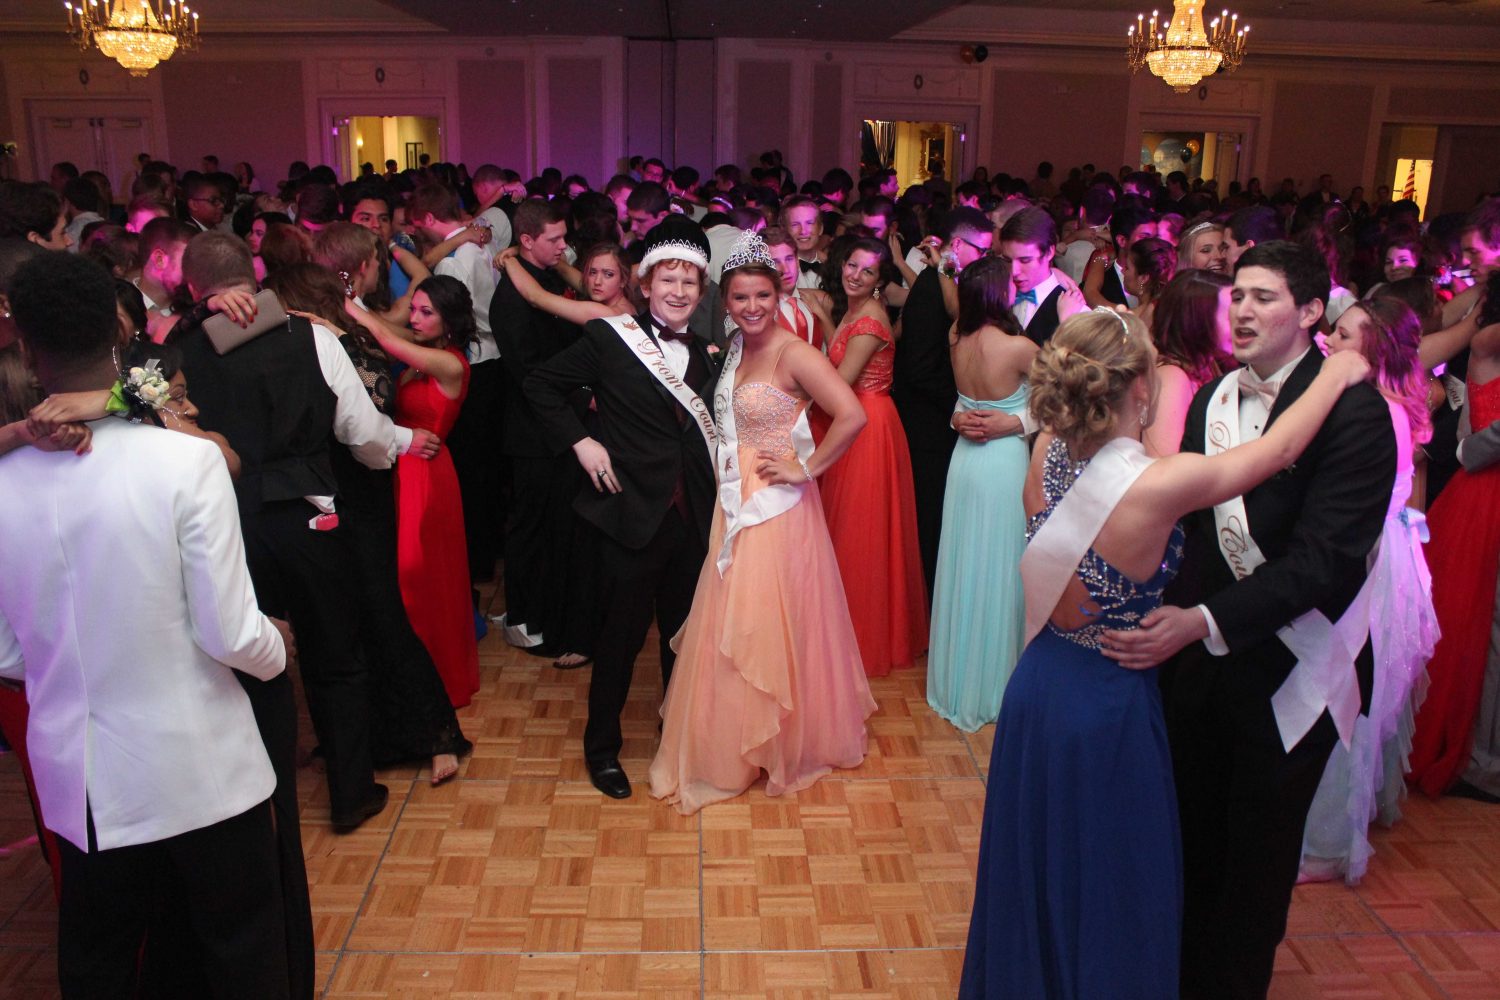 SLIDESHOW Students at prom spent A Night at Sea